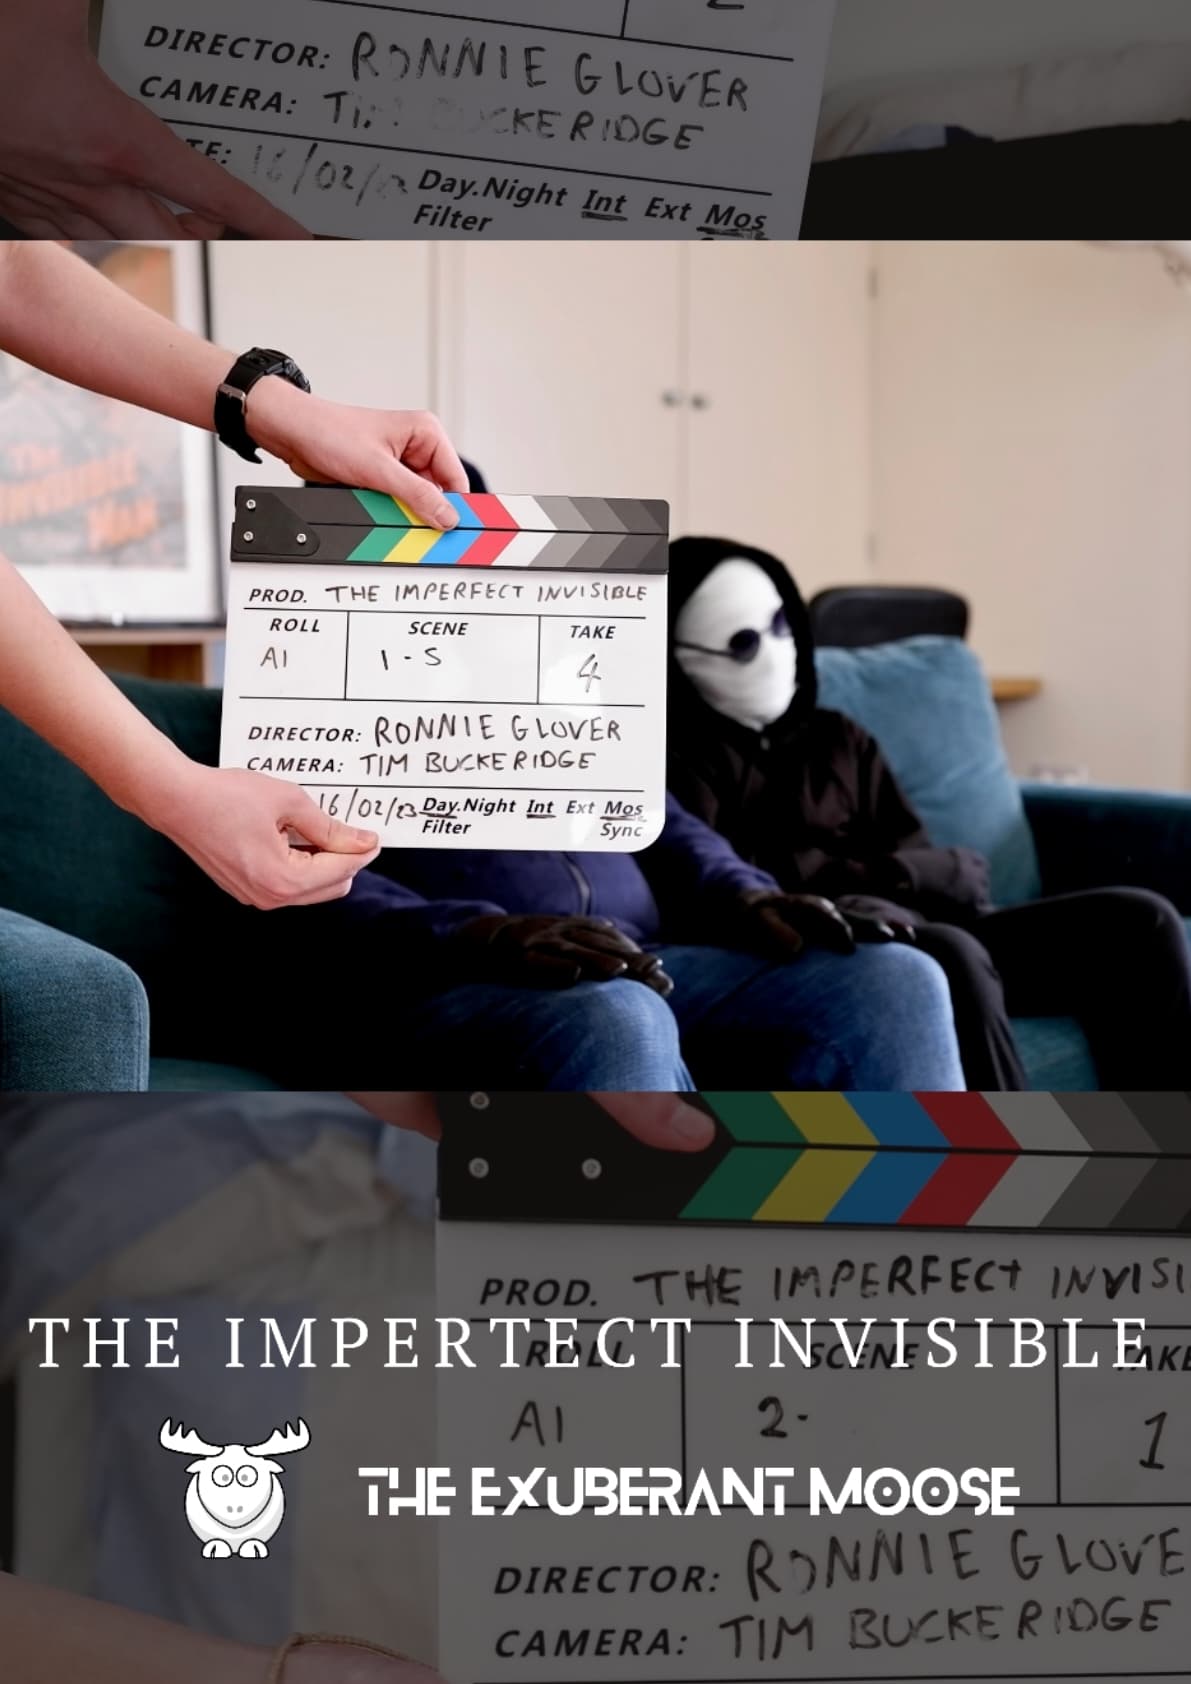 The Imperfect Invisible